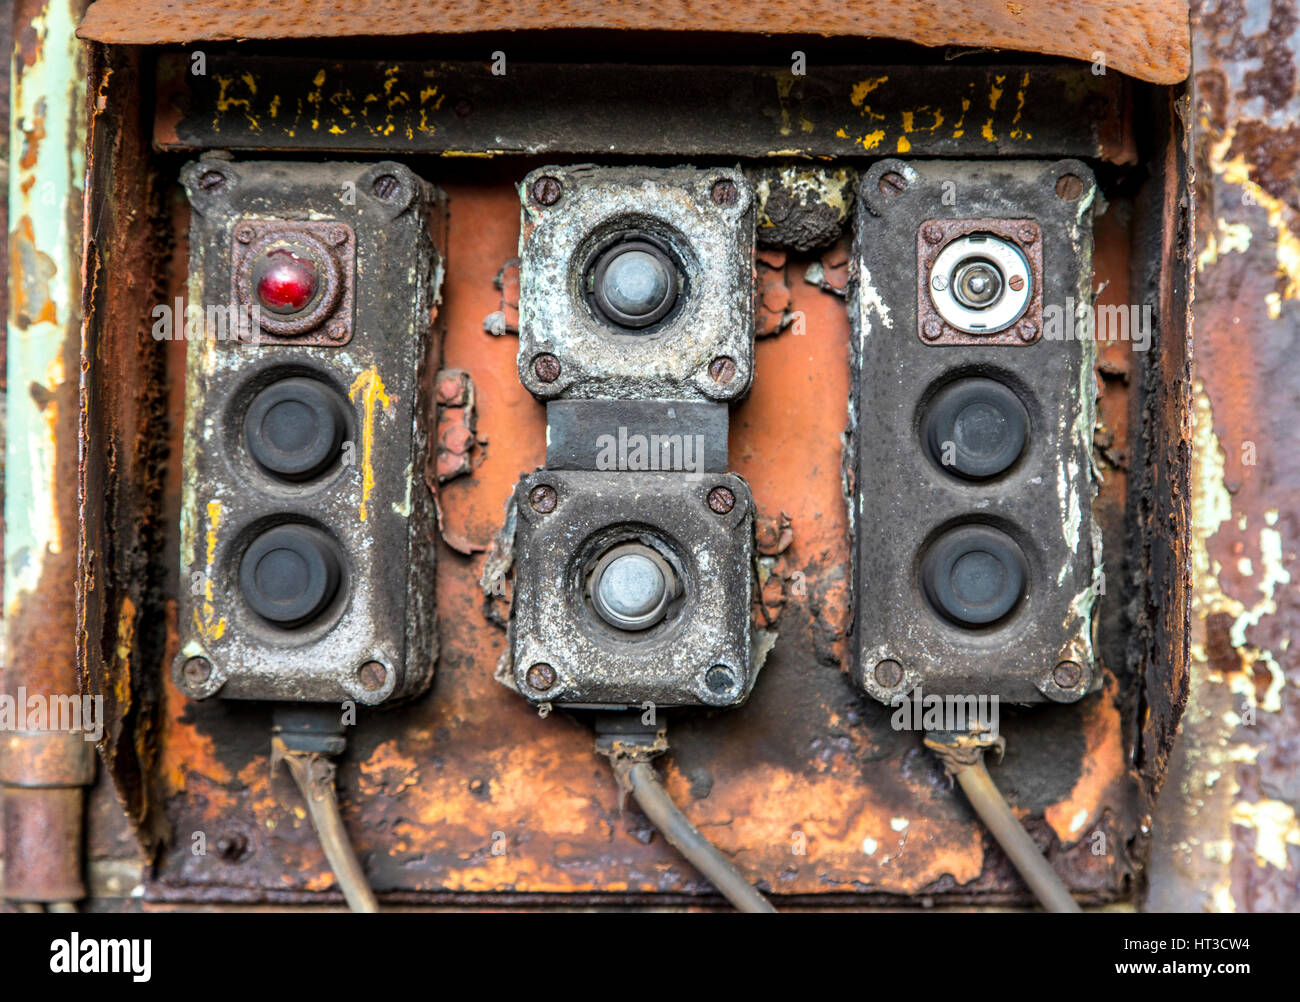 Electrical equipment, switch, destroyed, broken, Rusty metal surface, structures, Stock Photo